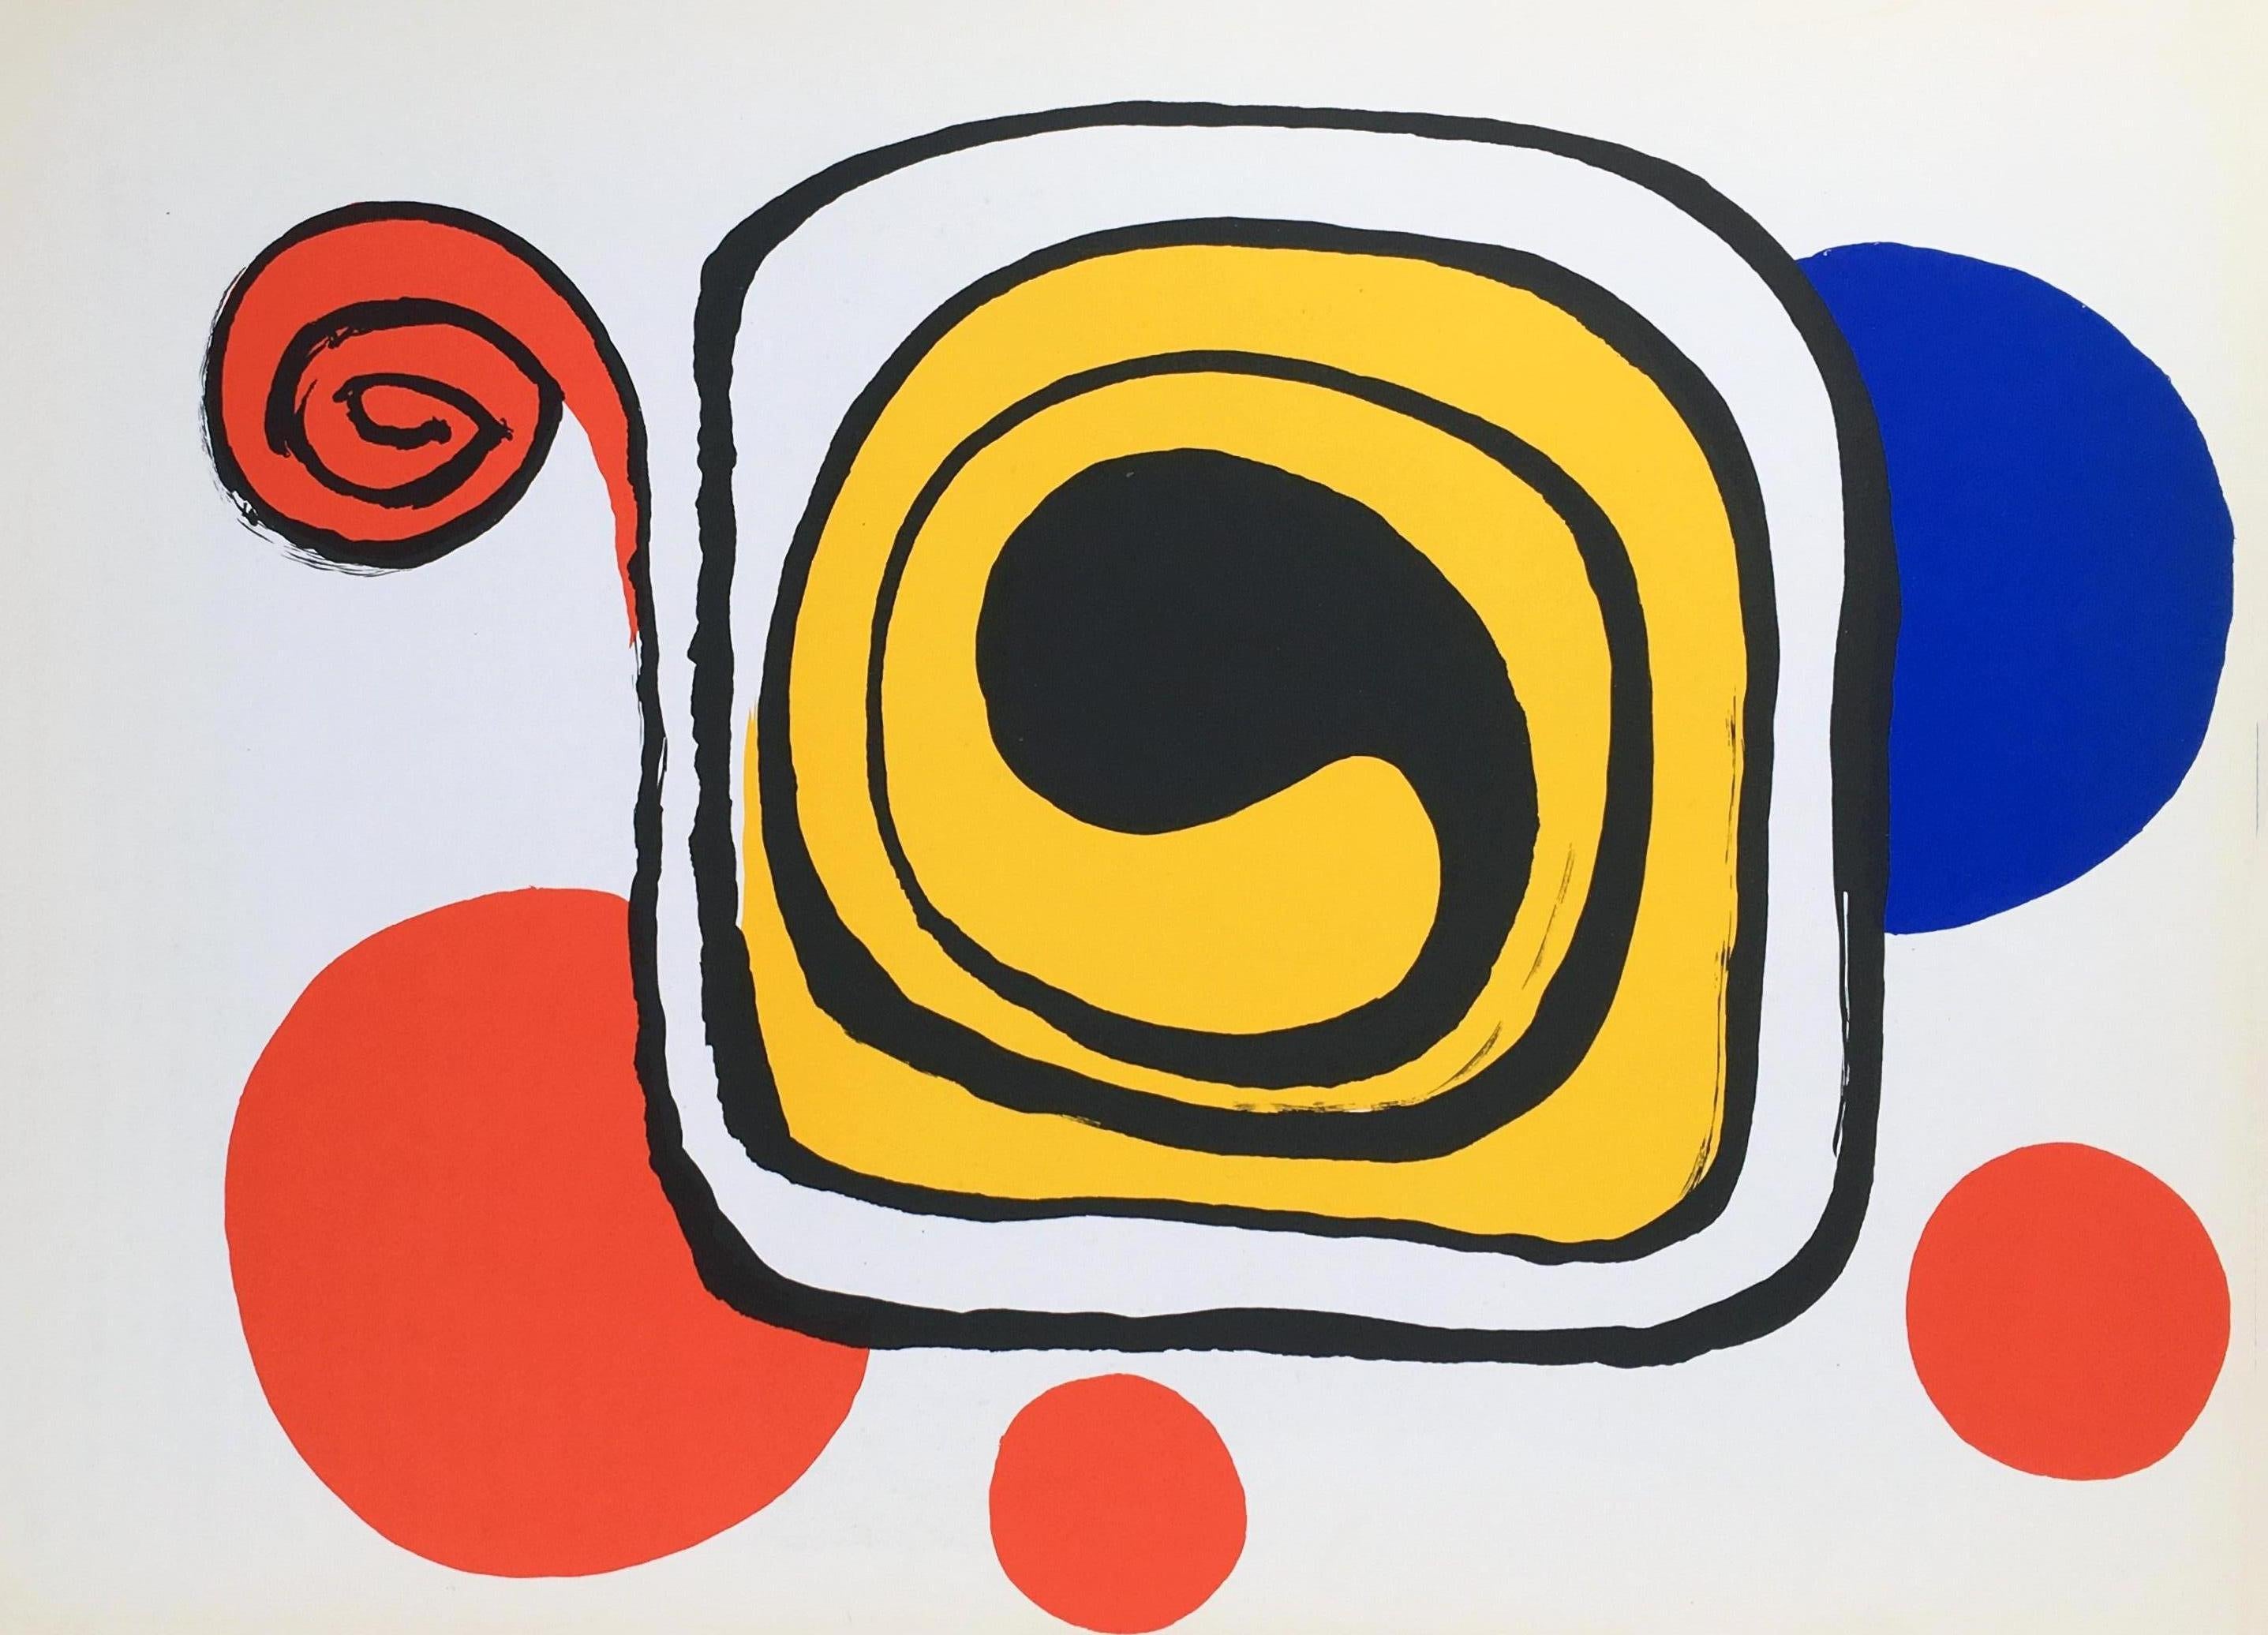 Alexander Calder Lithograph c. 1971 from Derrière le miroir:

Lithograph in colors; 15 x 11 inches.
Very good overall vintage condition; well-preseved.
Unsigned from an edition of unknown.
From: Derrière le miroir Printed in France c. 1971.